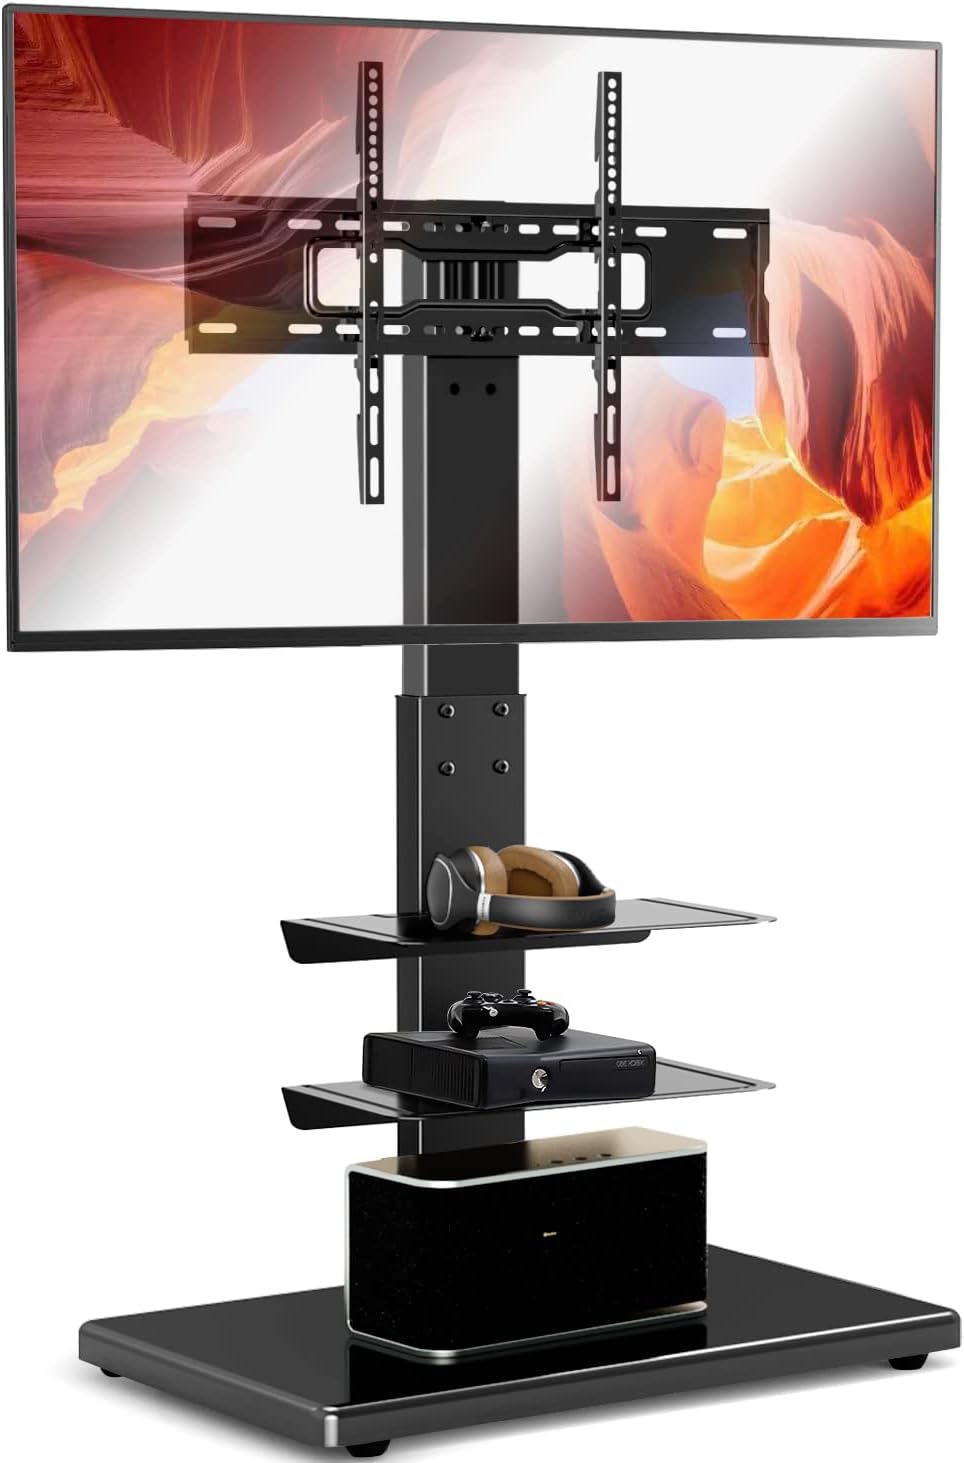 YOMT Floor TV Stand with Sturdy Wood Base, Tall Universal TV Stand with Mount for Most 32-75 inch TVs up to 110 lbs, Height Adjustable TV Stand with Swivel, TV Mount Stand with Media Shelves, Black